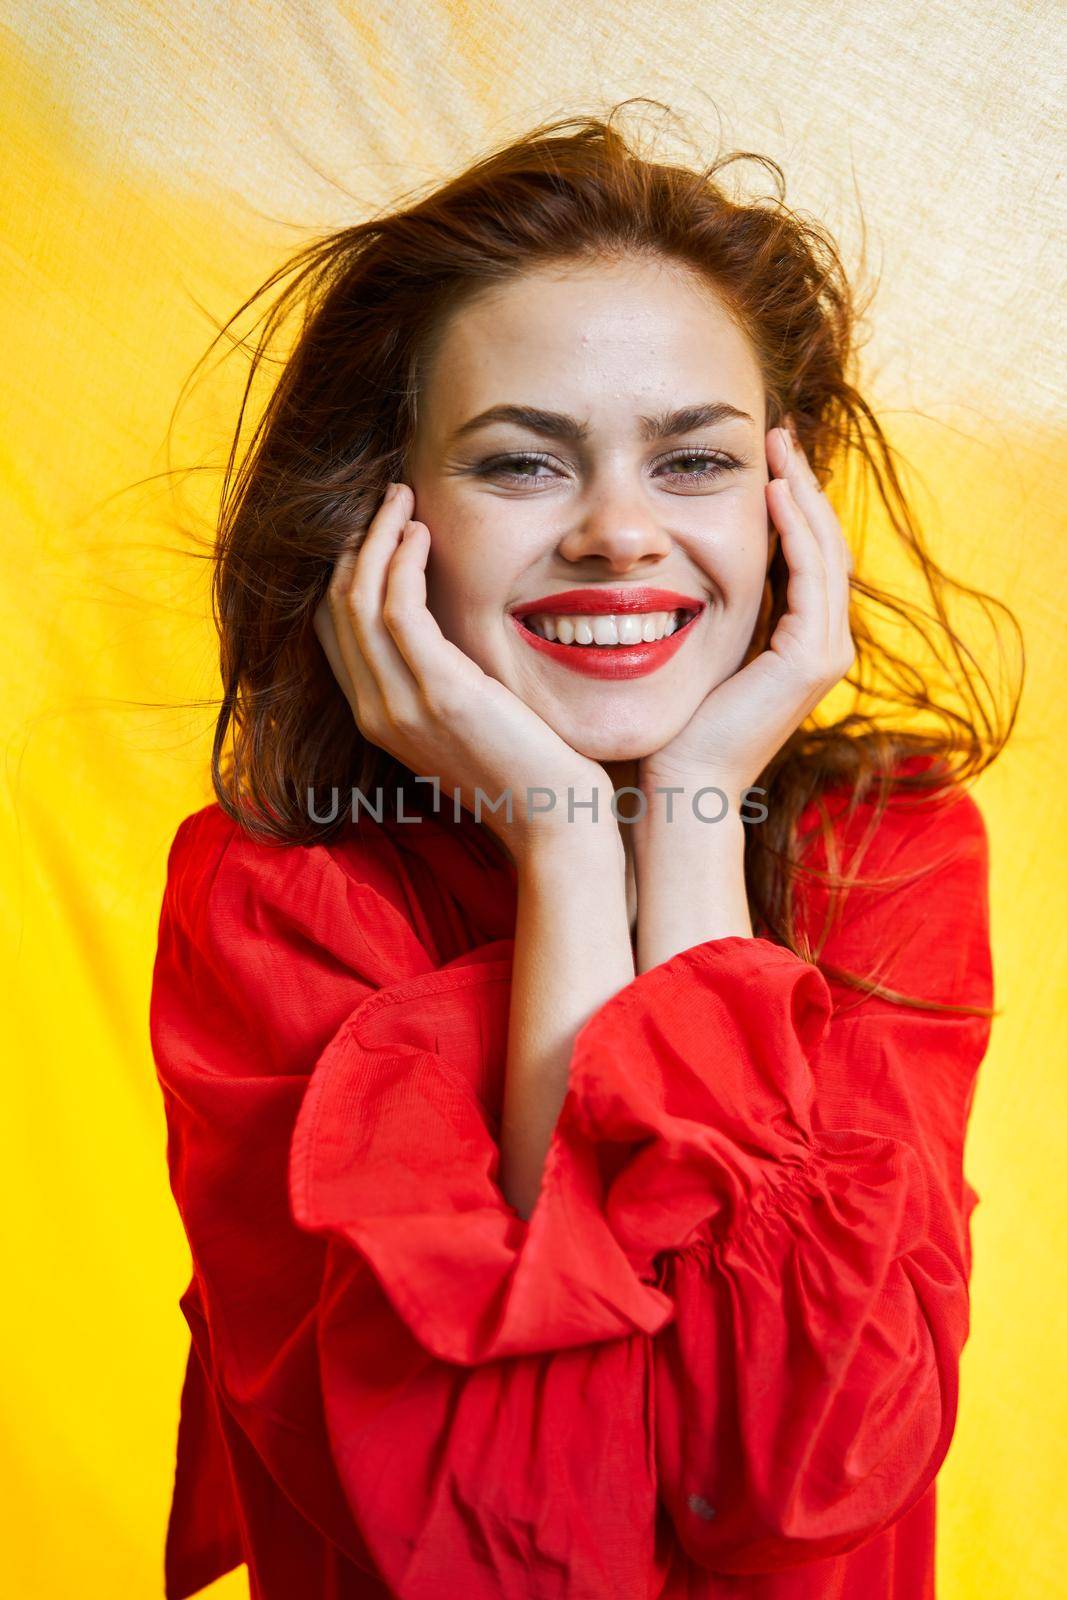 smiling woman in red dress posing yellow background by Vichizh